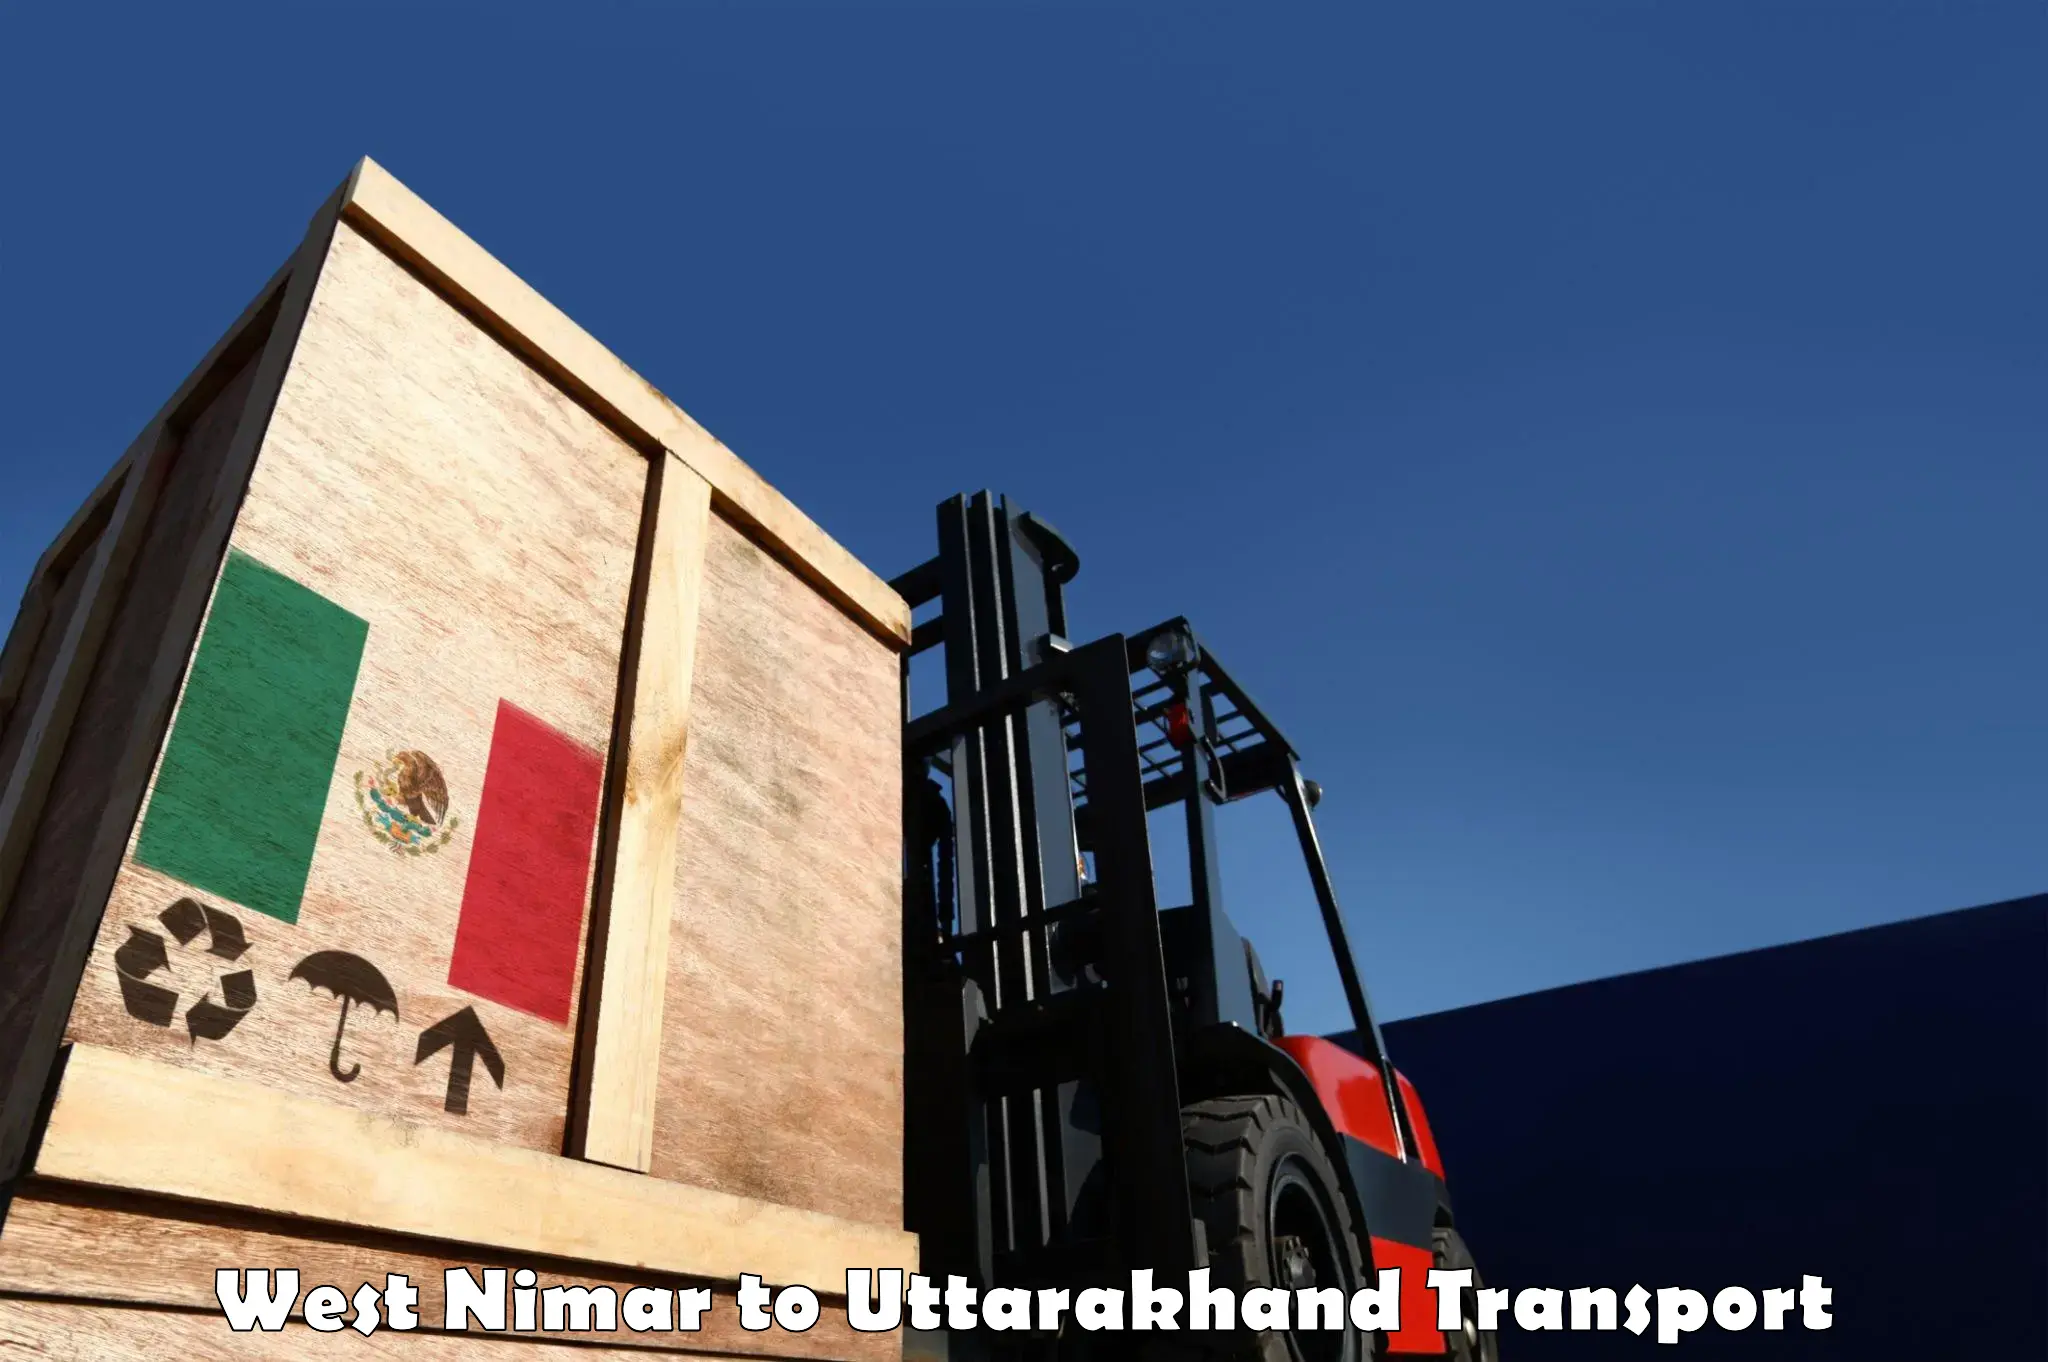 Land transport services West Nimar to Mussoorie